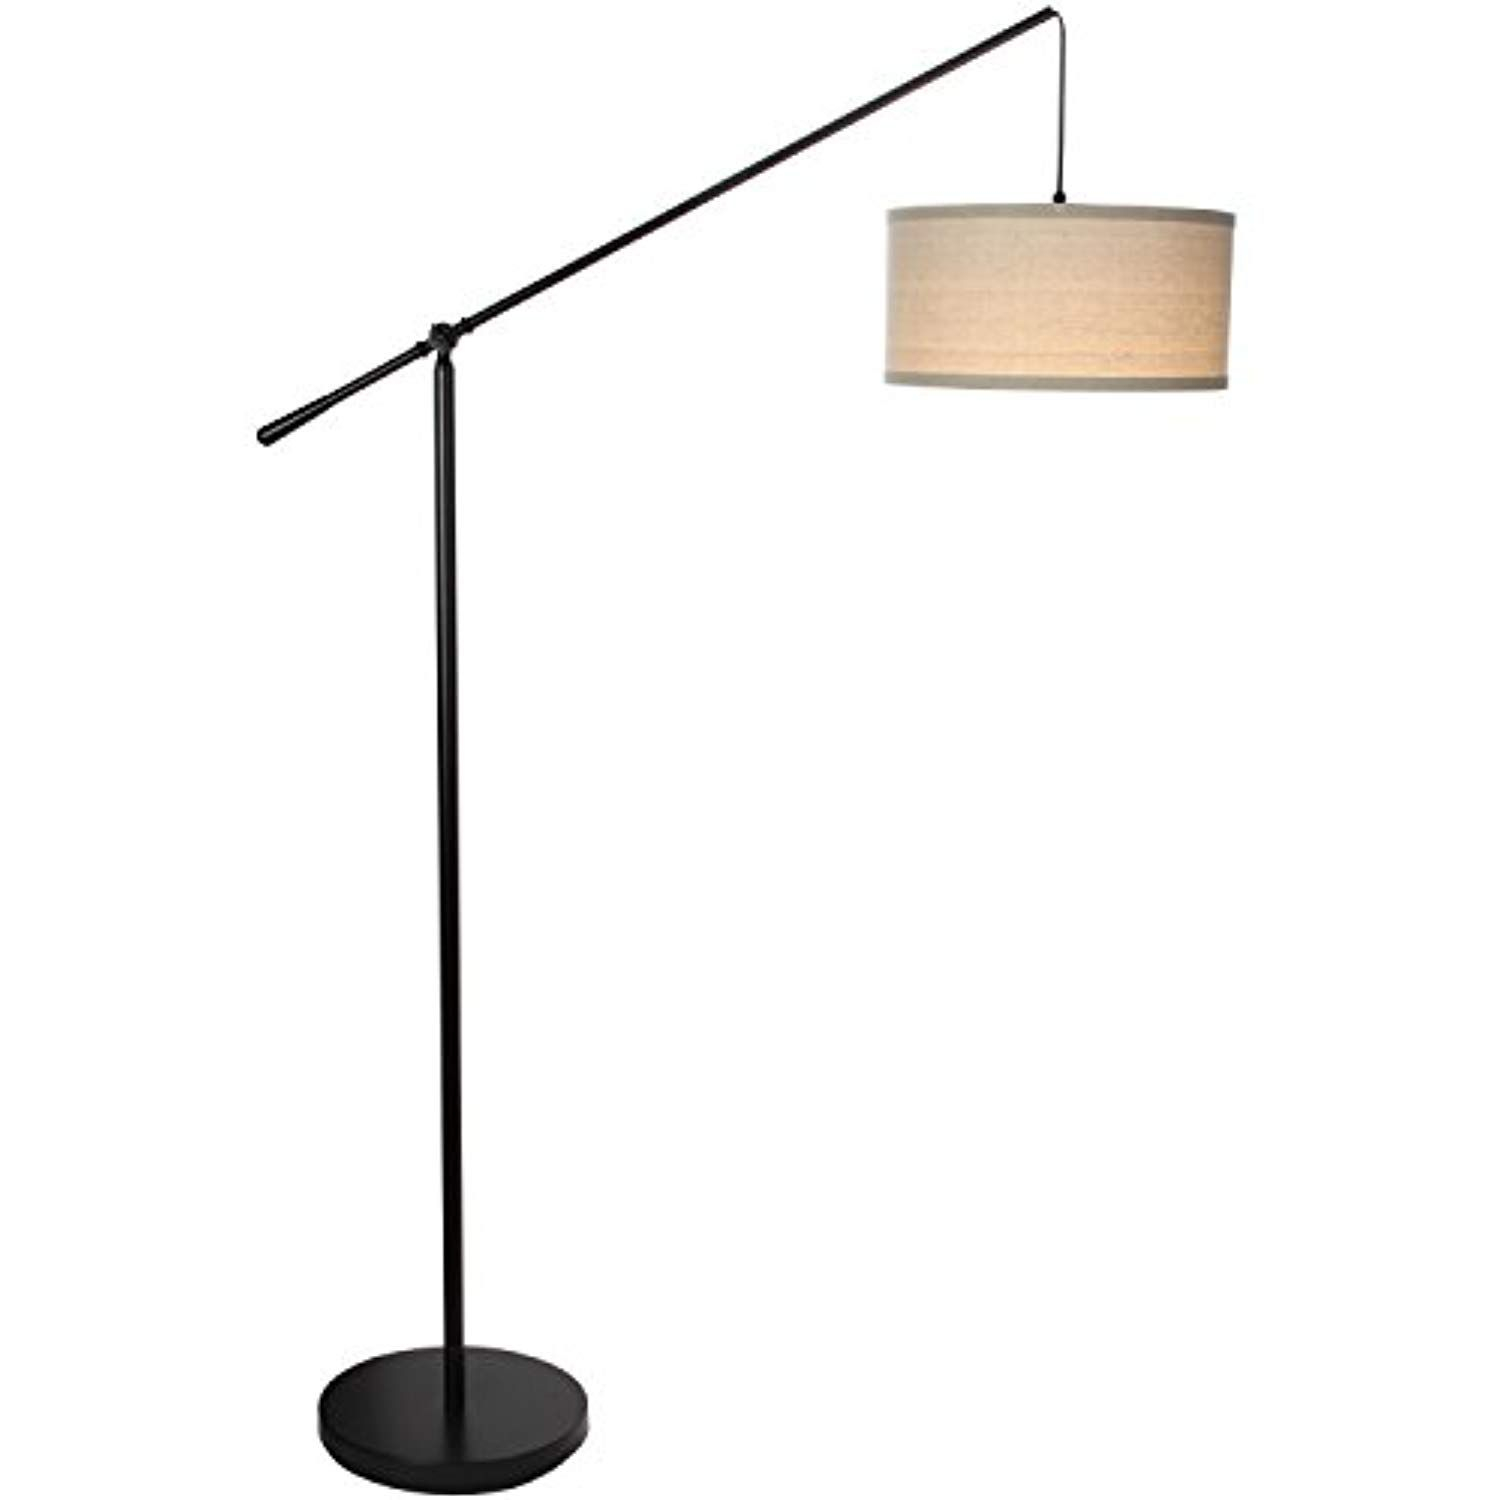 Brightech Hudson 2 Living Room Led Arc Floor Lamp For in measurements 1500 X 1500